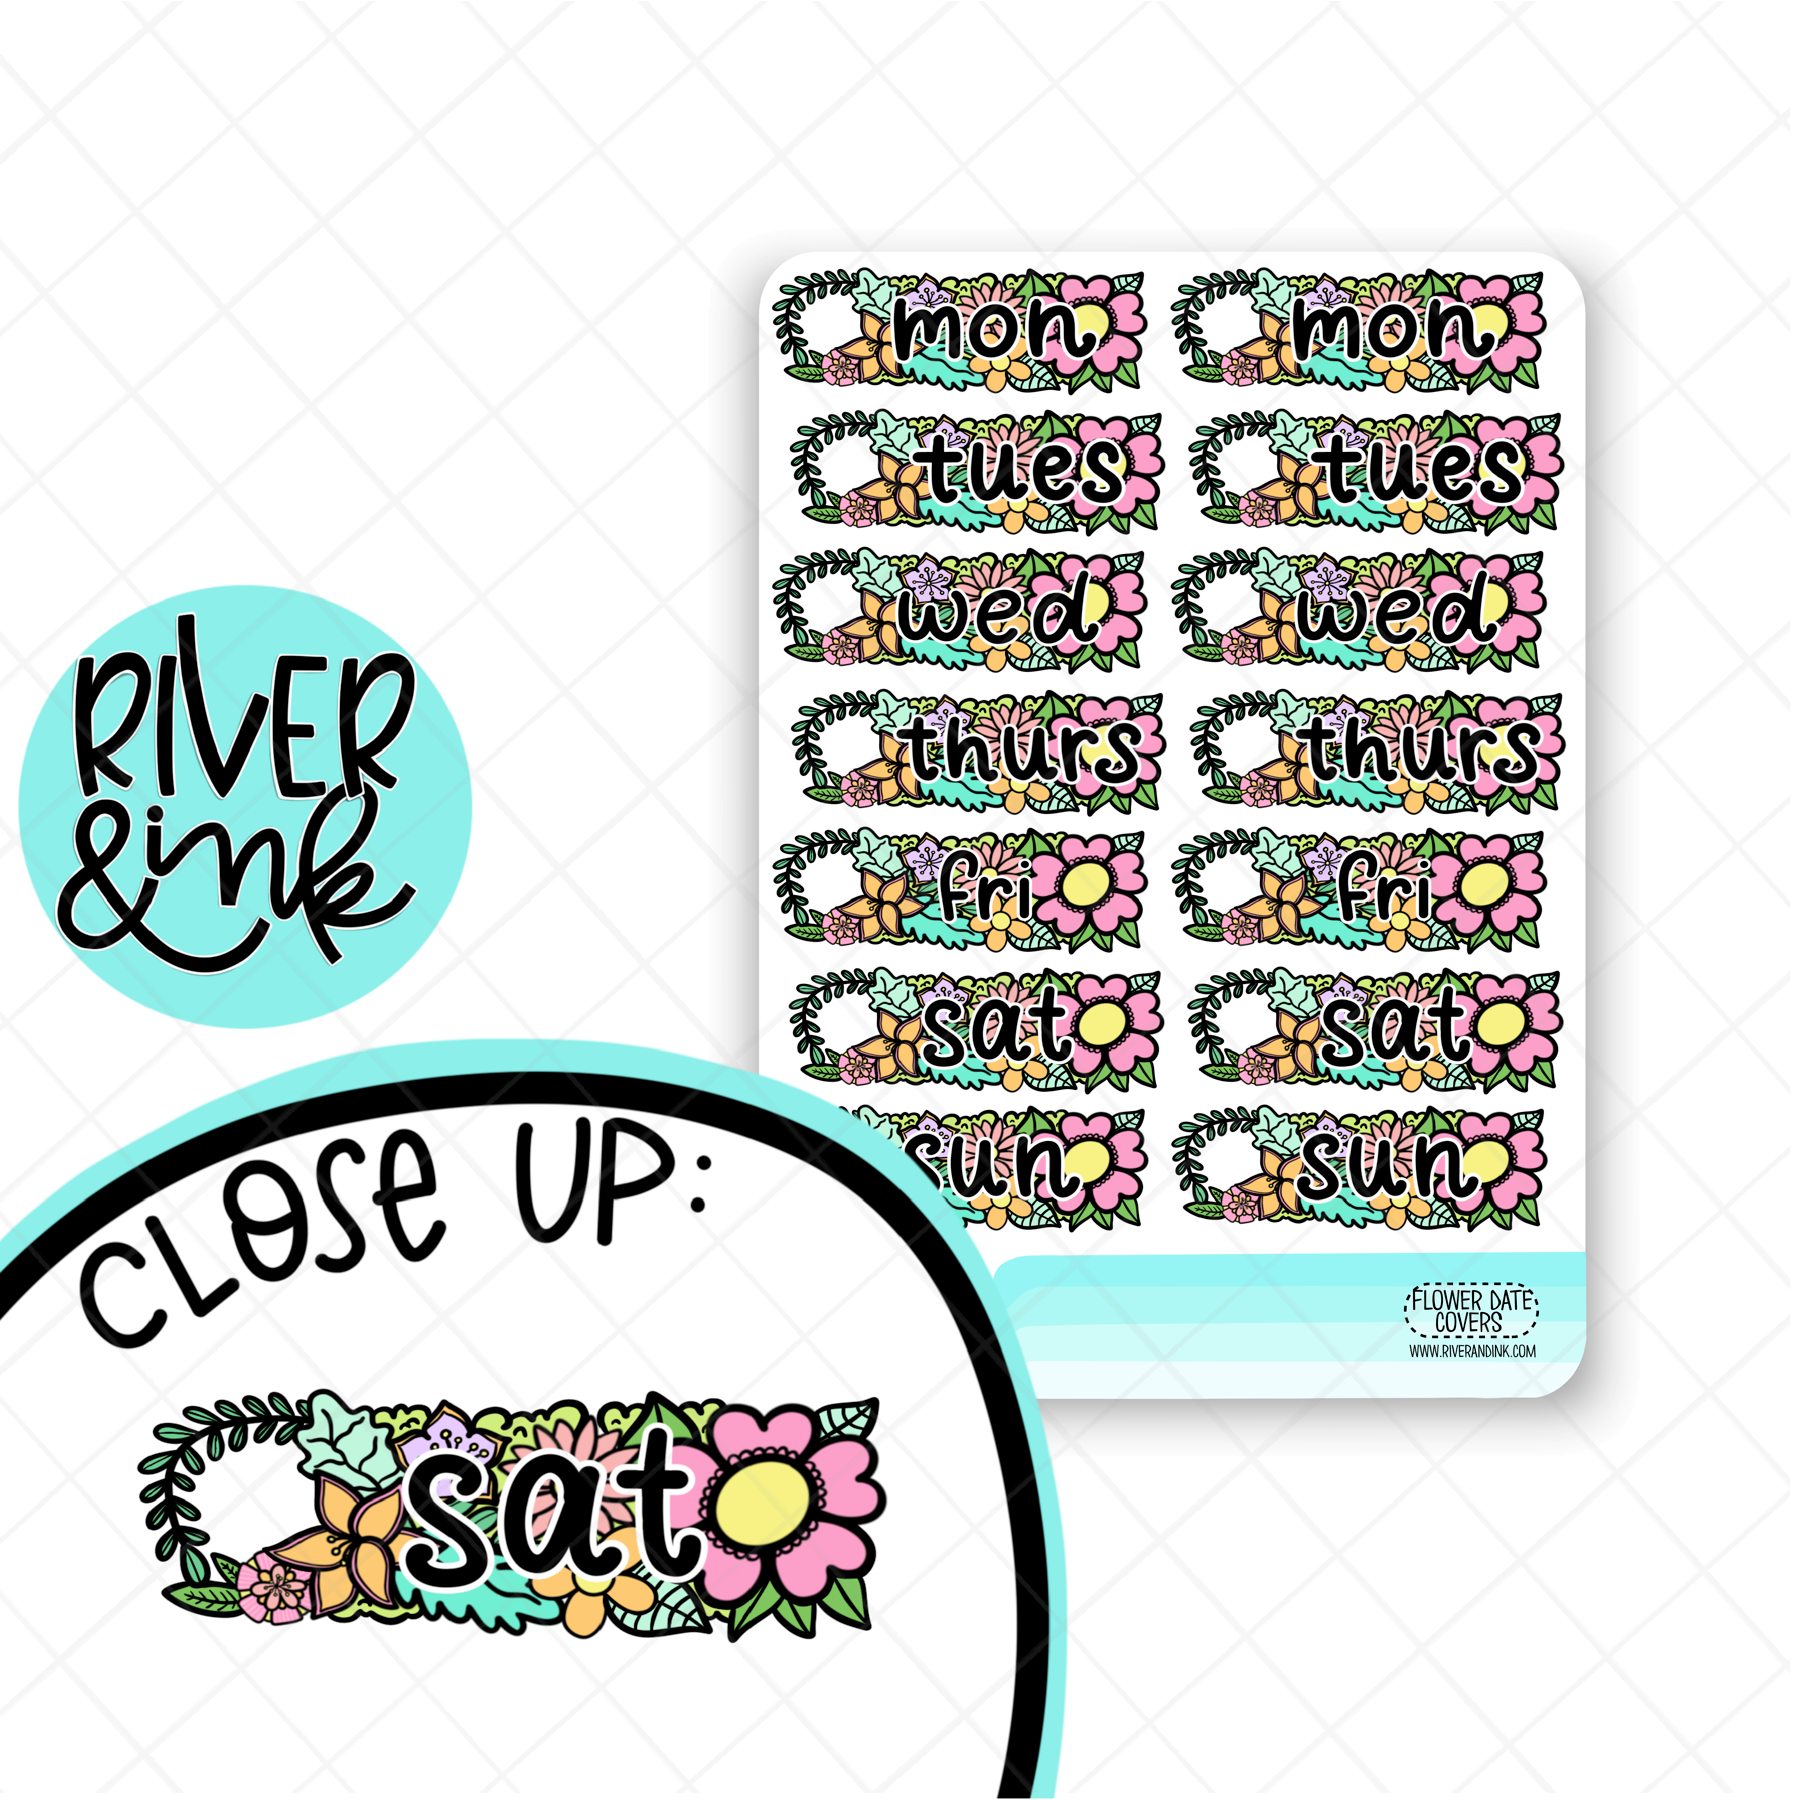 Flower Date Covers | Hand Drawn Planner Stickers